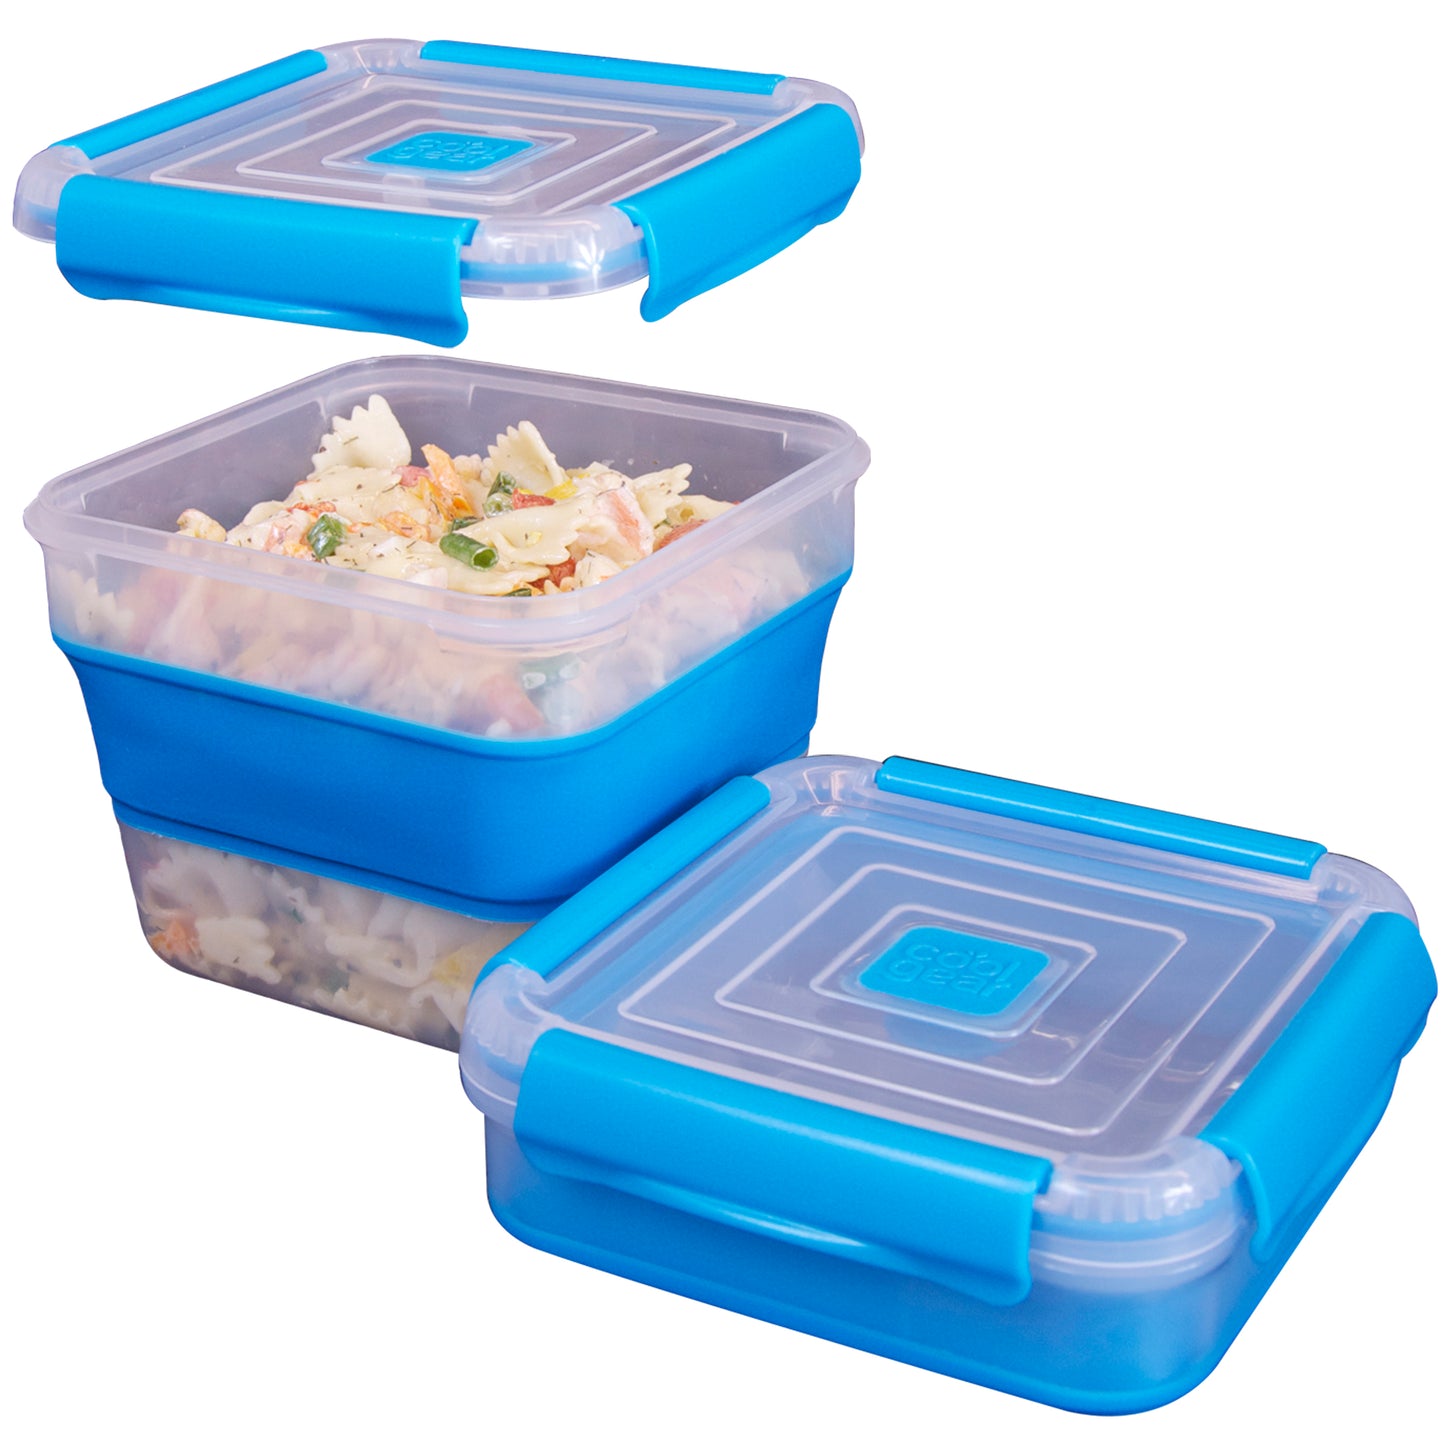 COOL GEAR 3-Pack Collapsible 7.5 Cup Square Food Container | Dishwasher and Microwave Safe | Perfect for On The Go Lunches and Leftovers | Expands to Hold 2x More | Air Tight Snaps Keeps Food Fresh